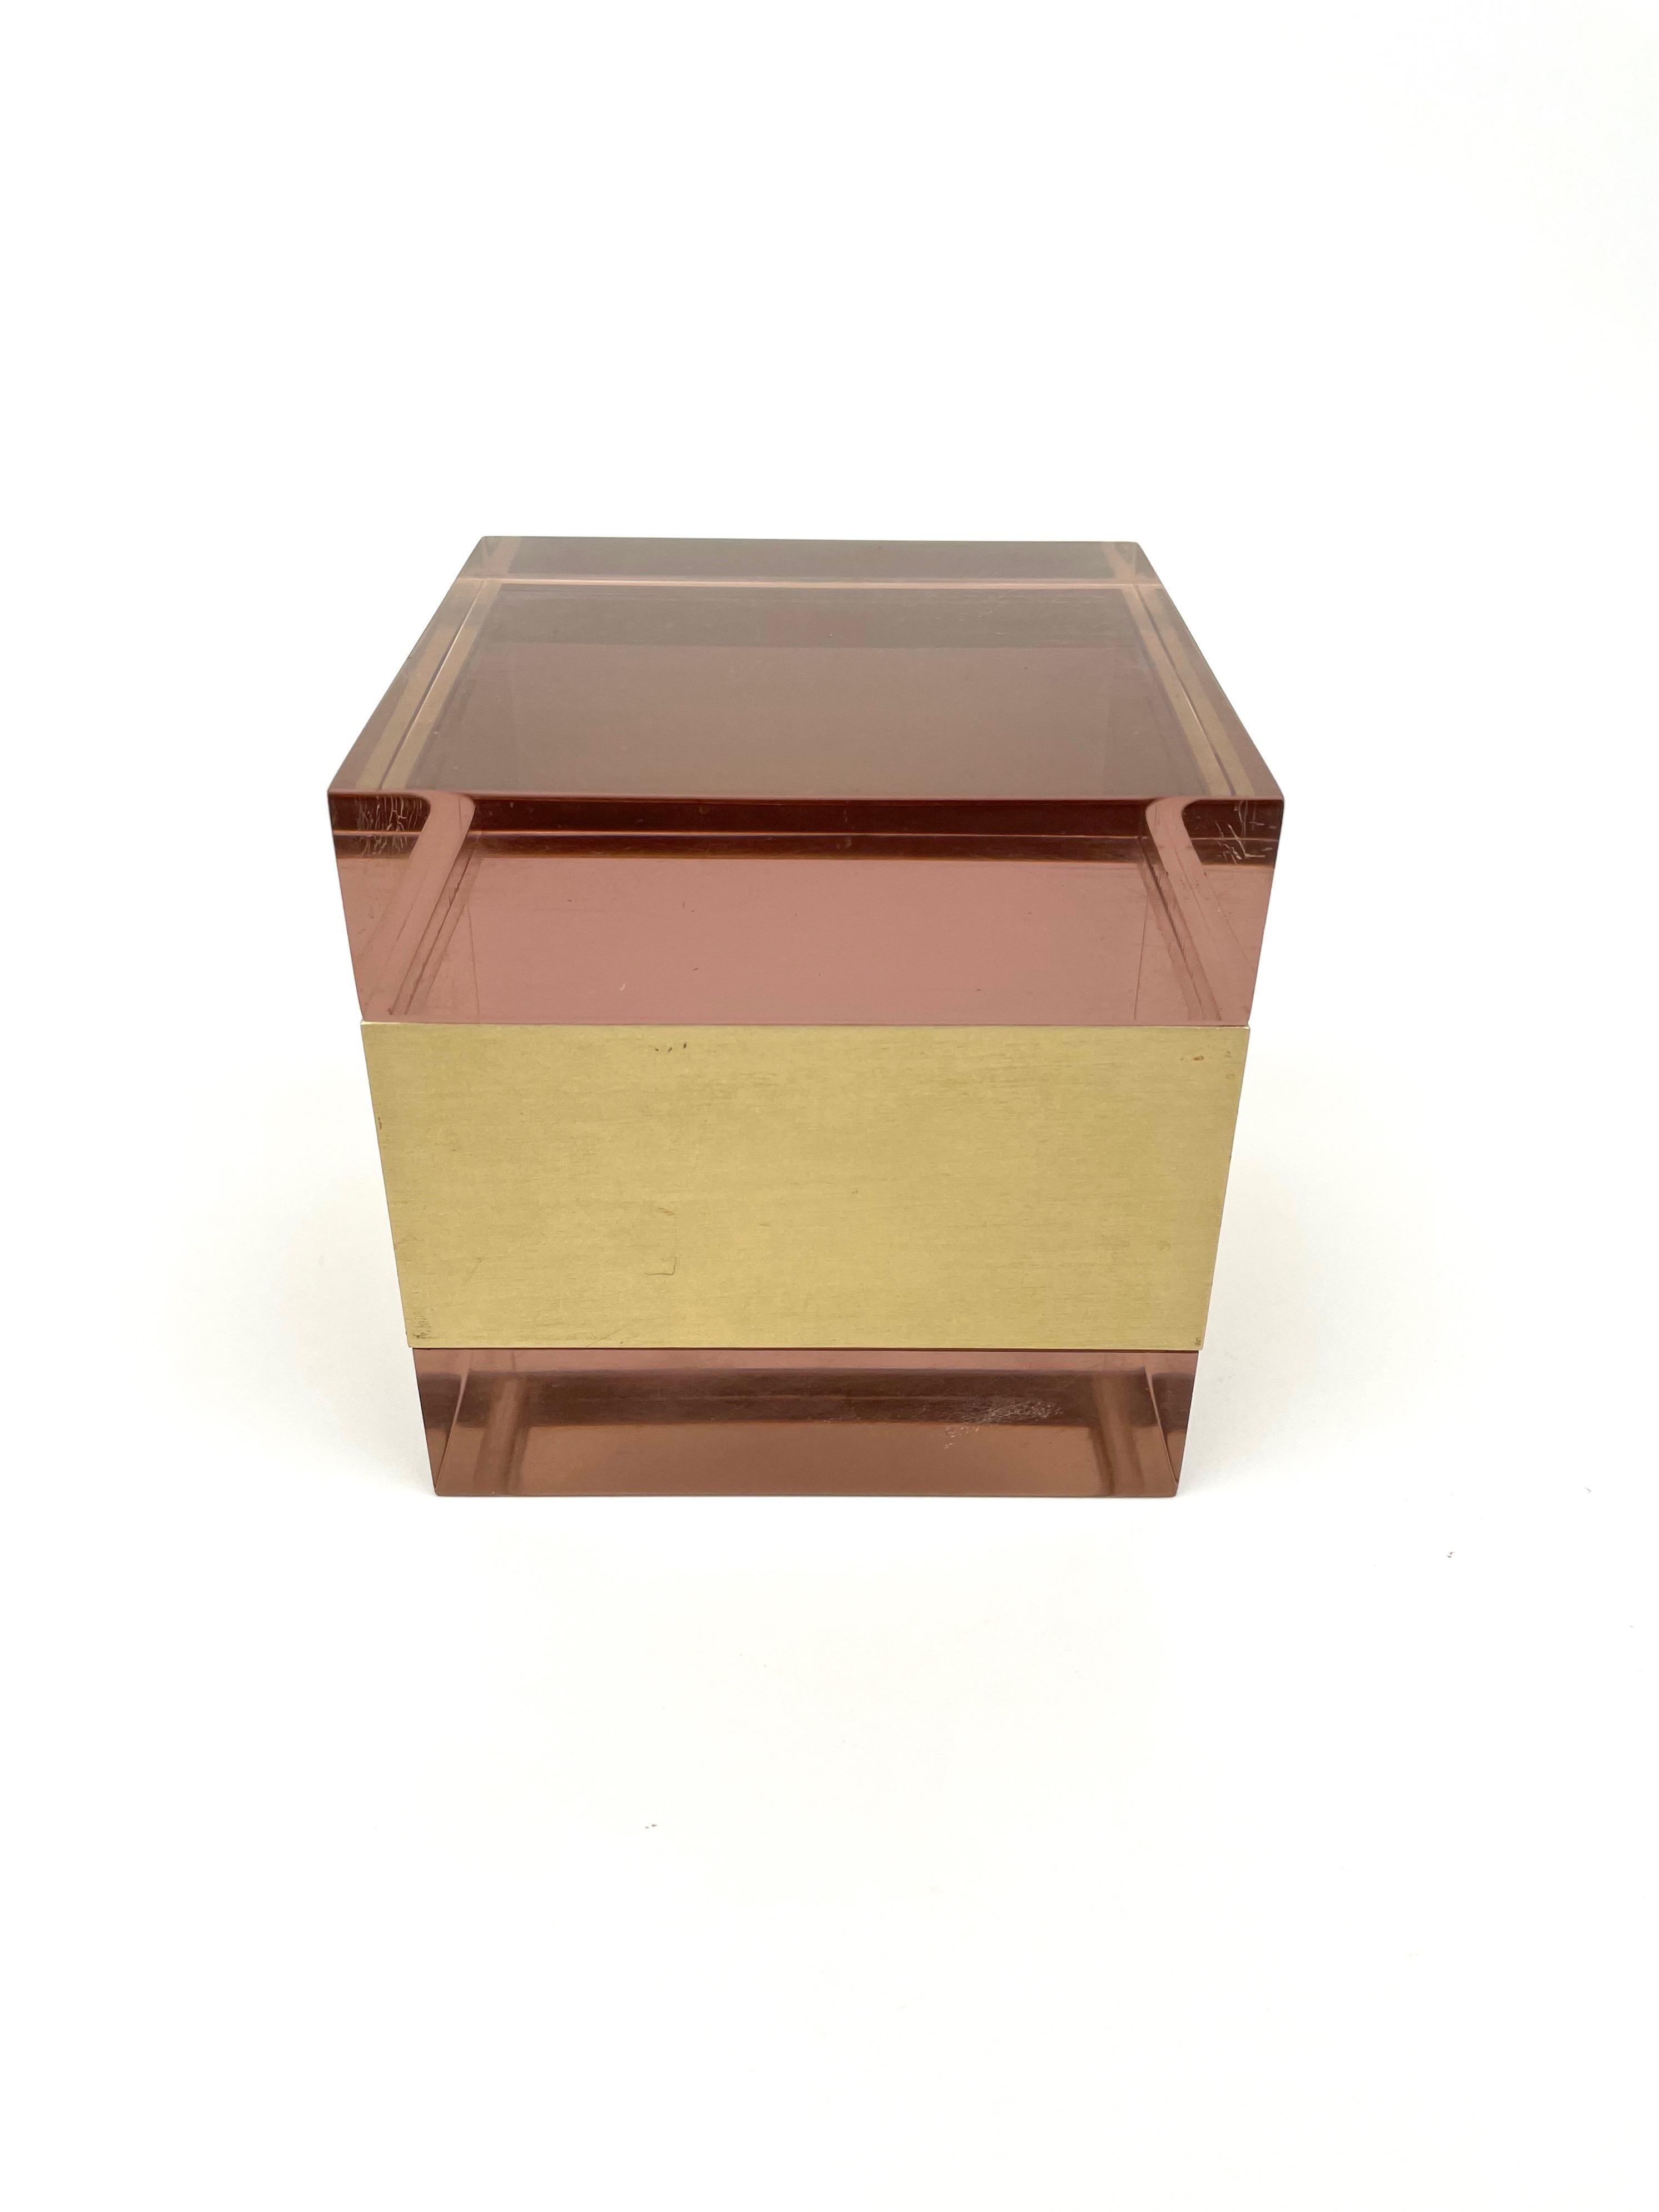 Alessandro Albrizzi Cube Box in Purple Lucite and Gold Metal, Italy, 1970s For Sale 8